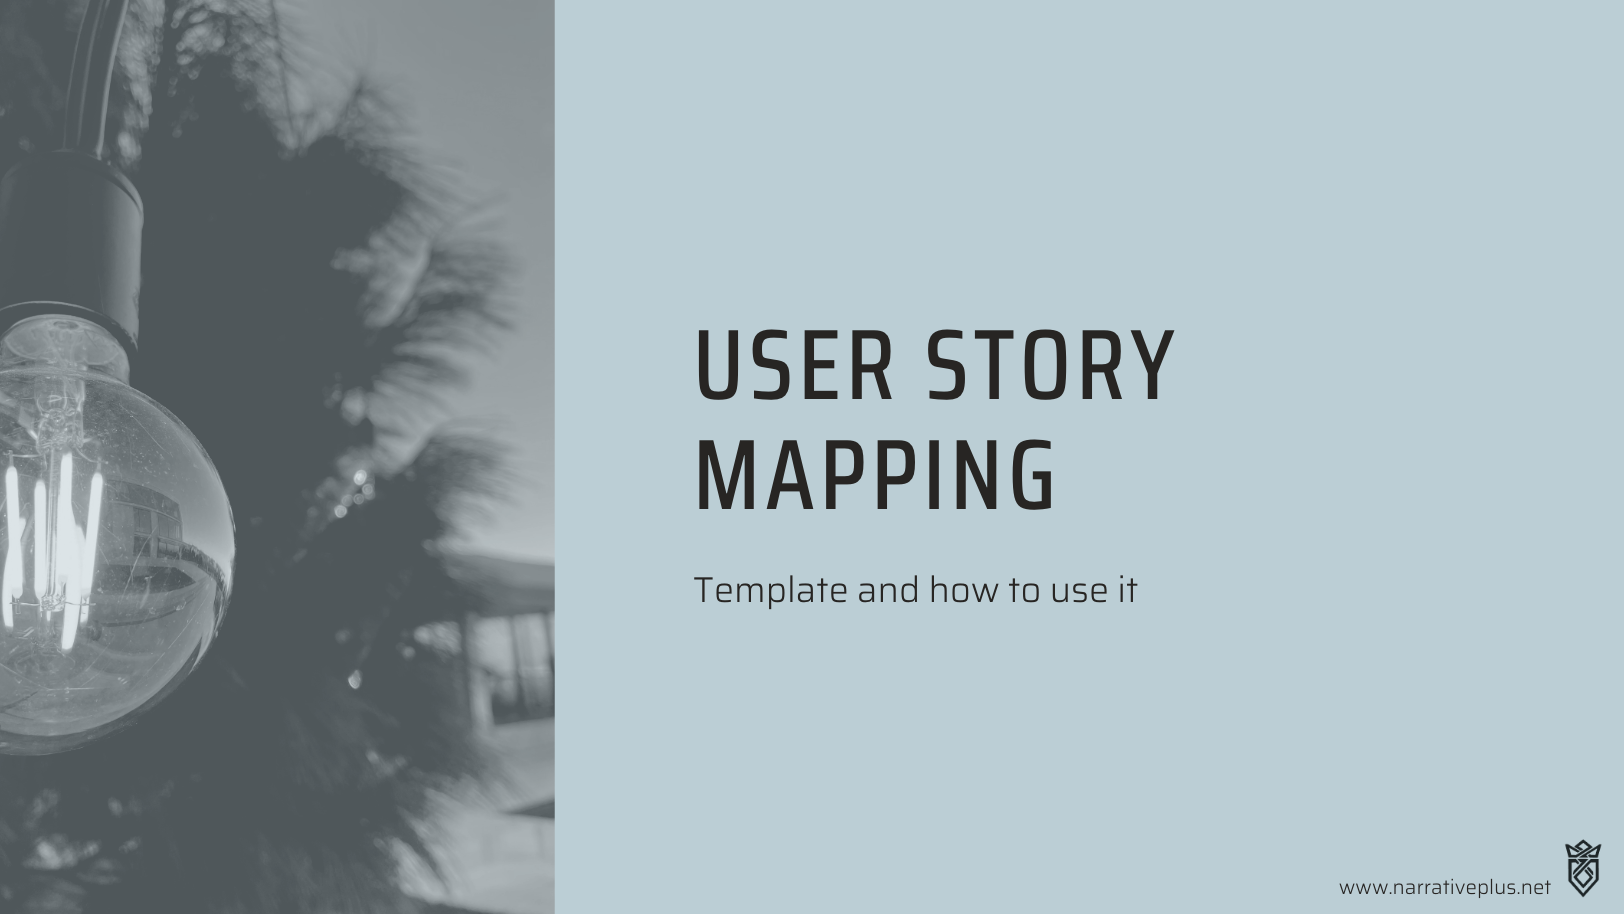 User Story Mapping template cover slide